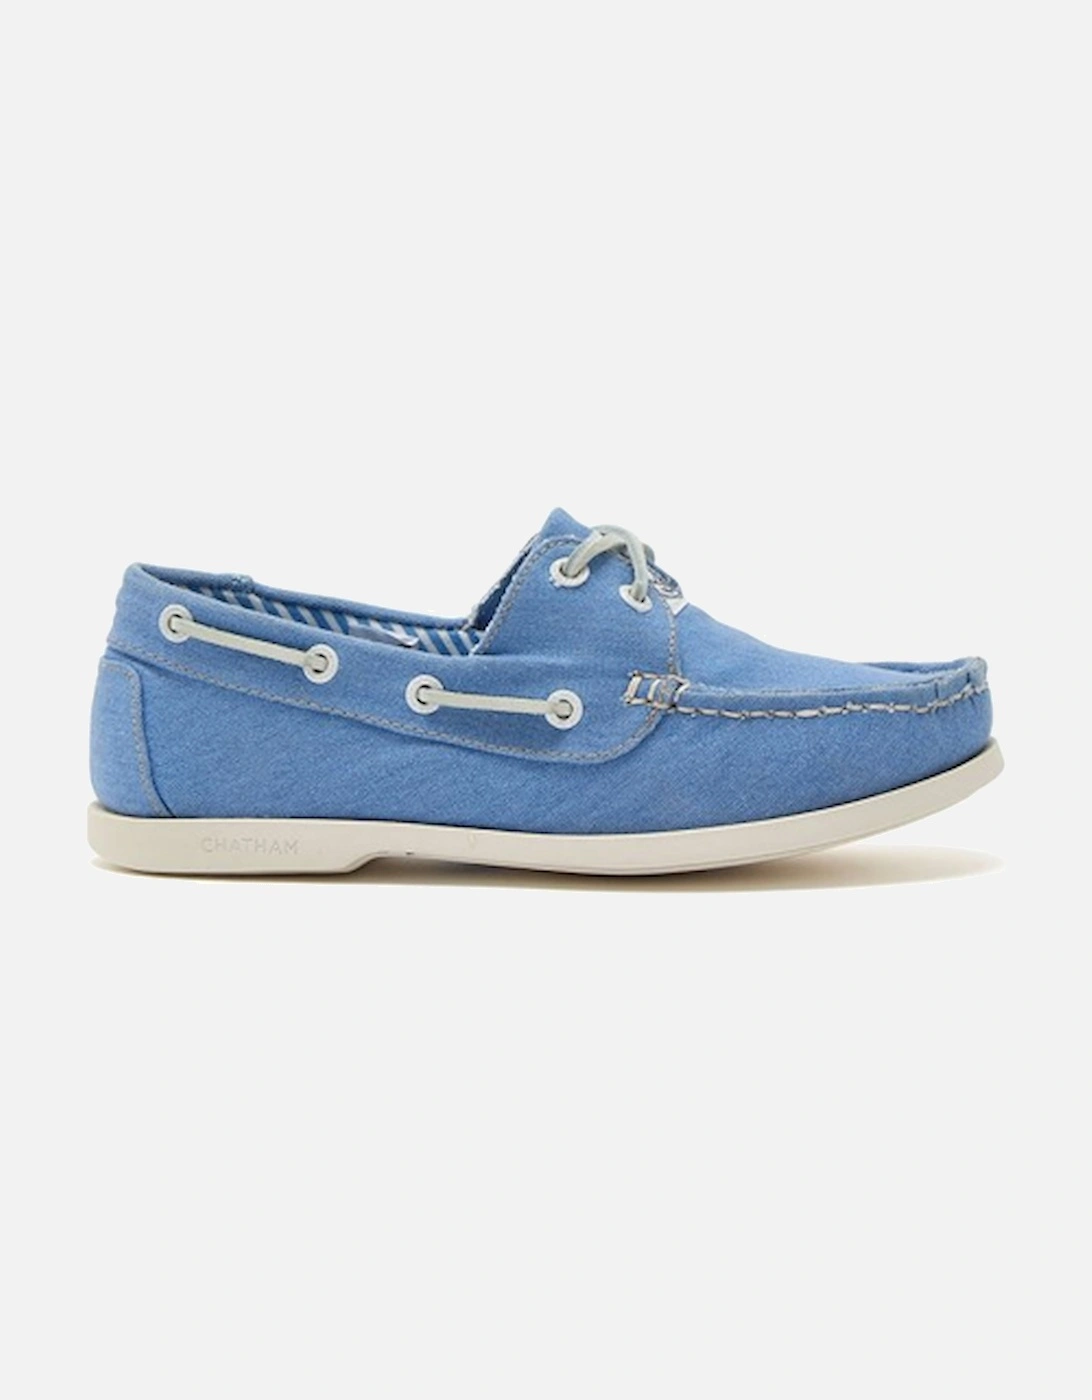 X Joules Women's Jetty Lady Canvas Boat Shoes Blue, 8 of 7